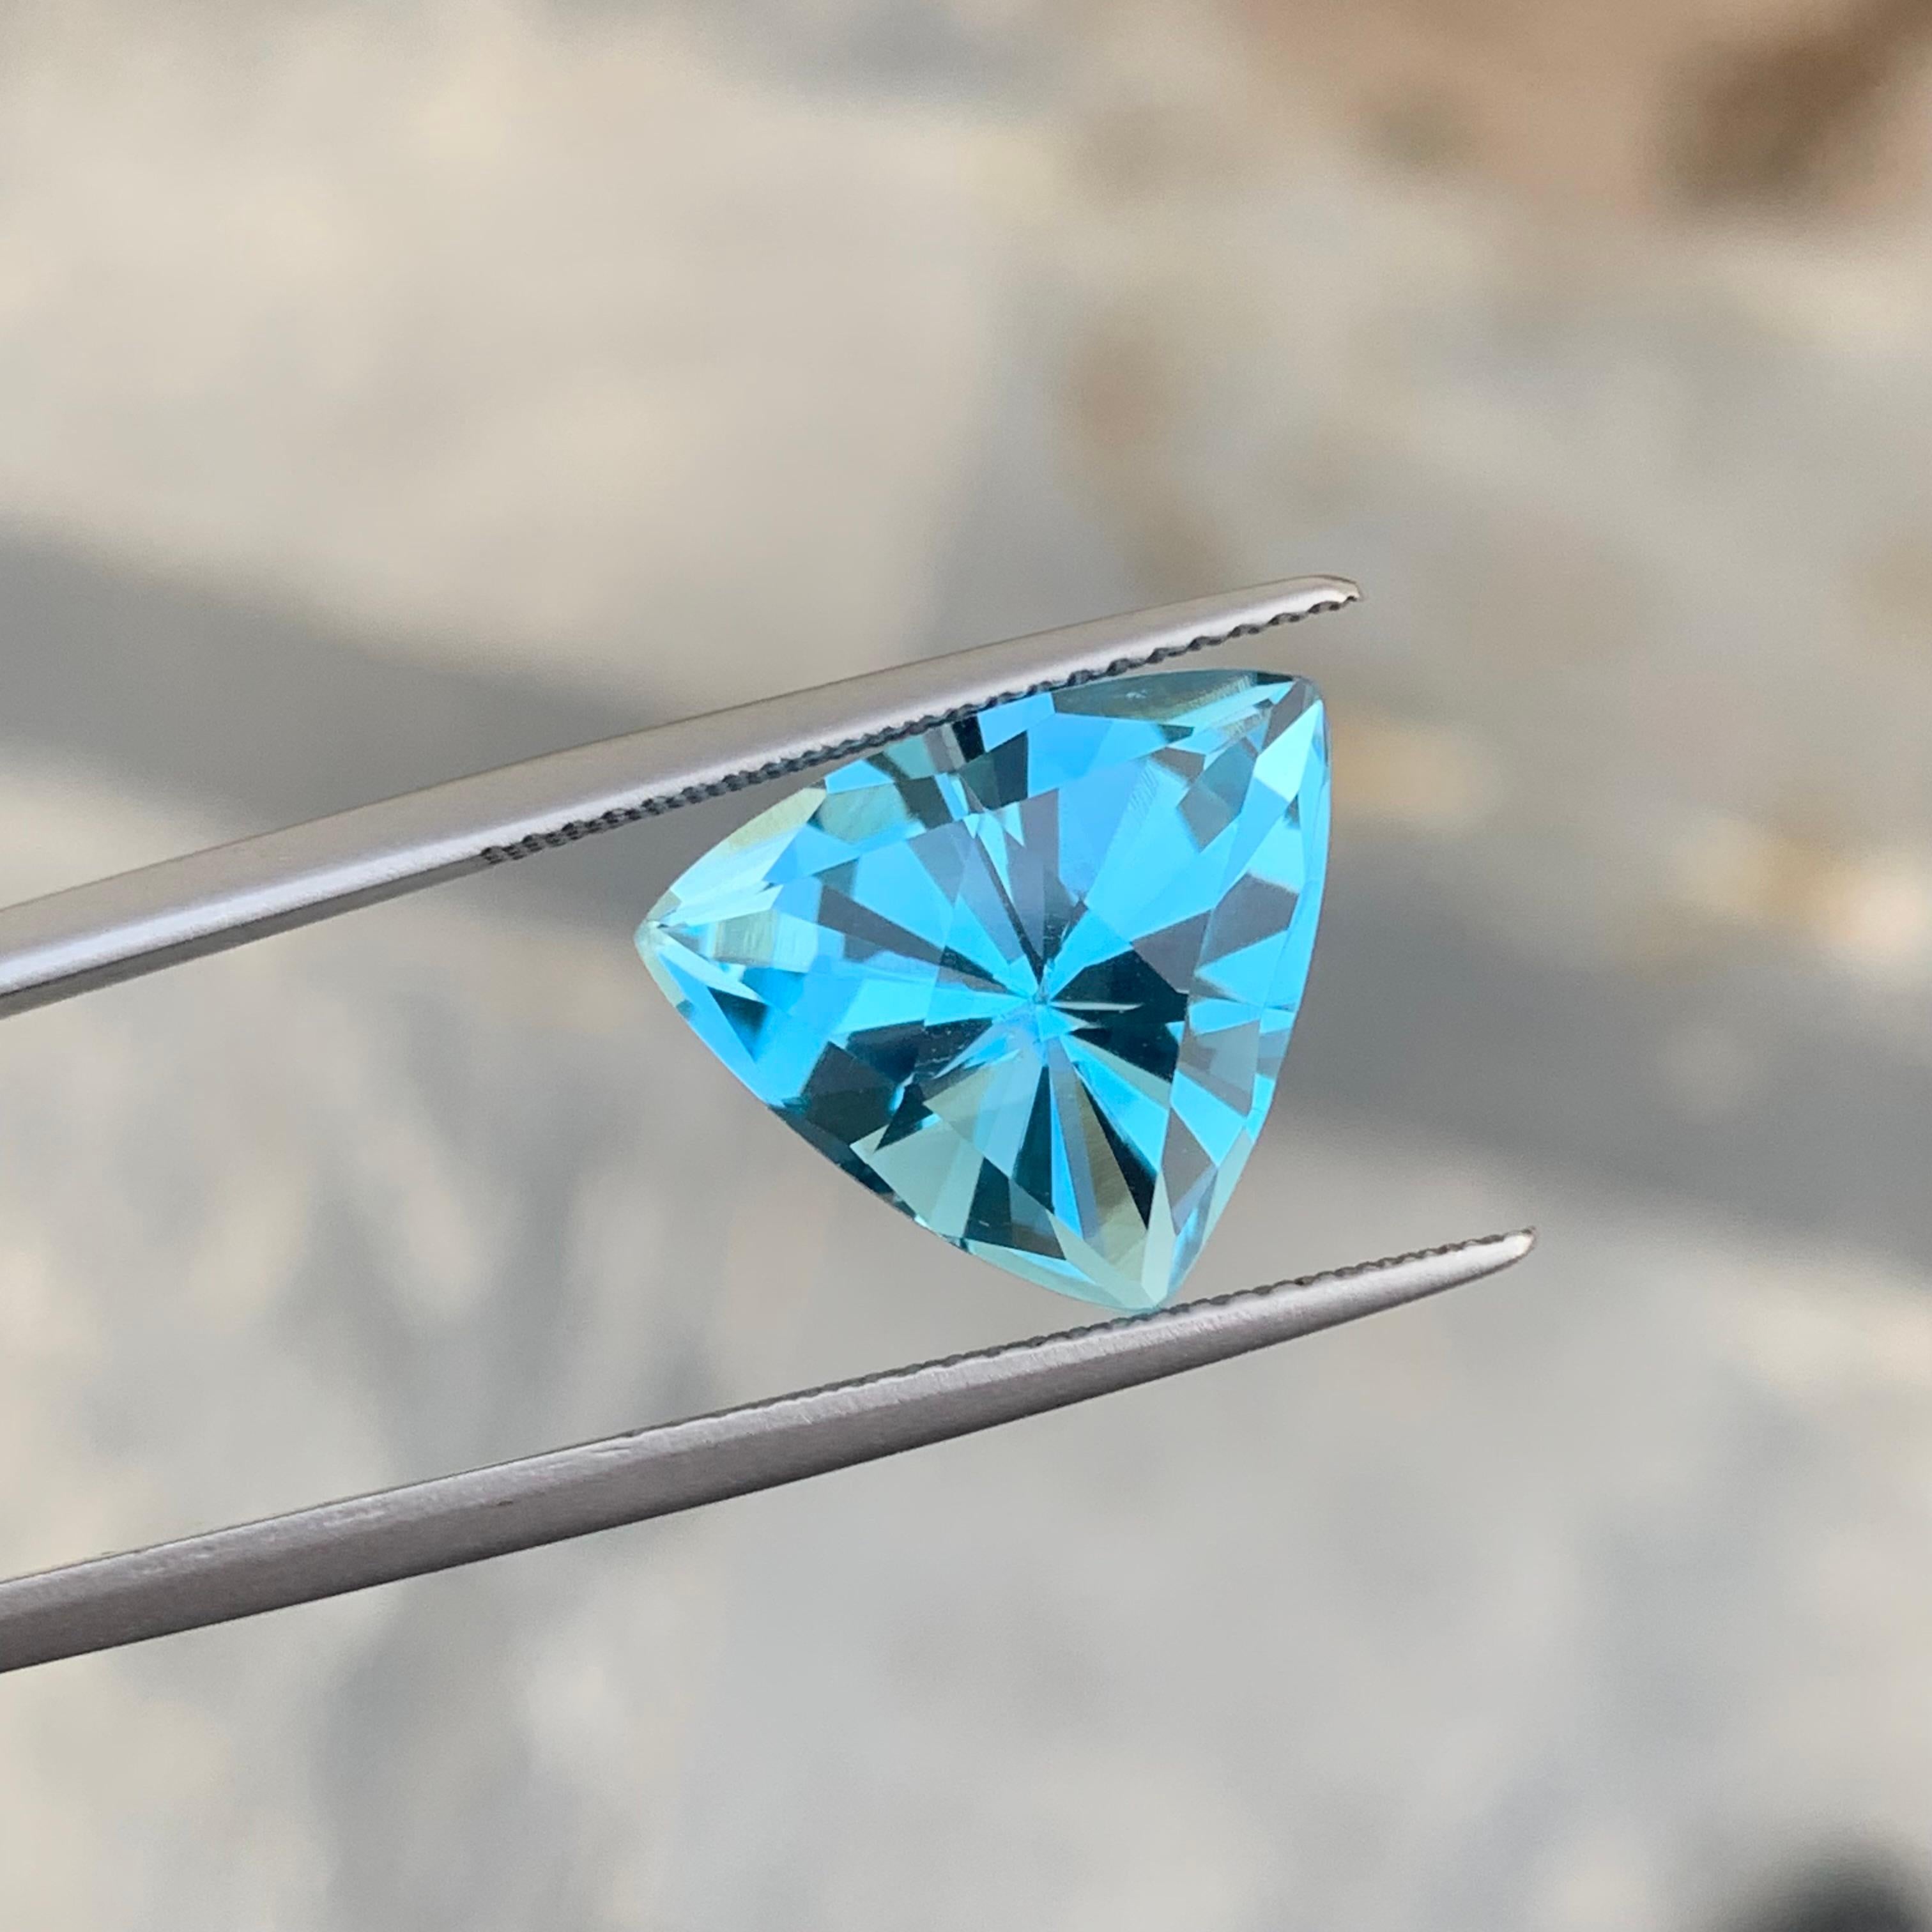 Genuine 9.0 Carat Trillion Cut Loose Blue Topaz from Brazil Available for Sell For Sale 2